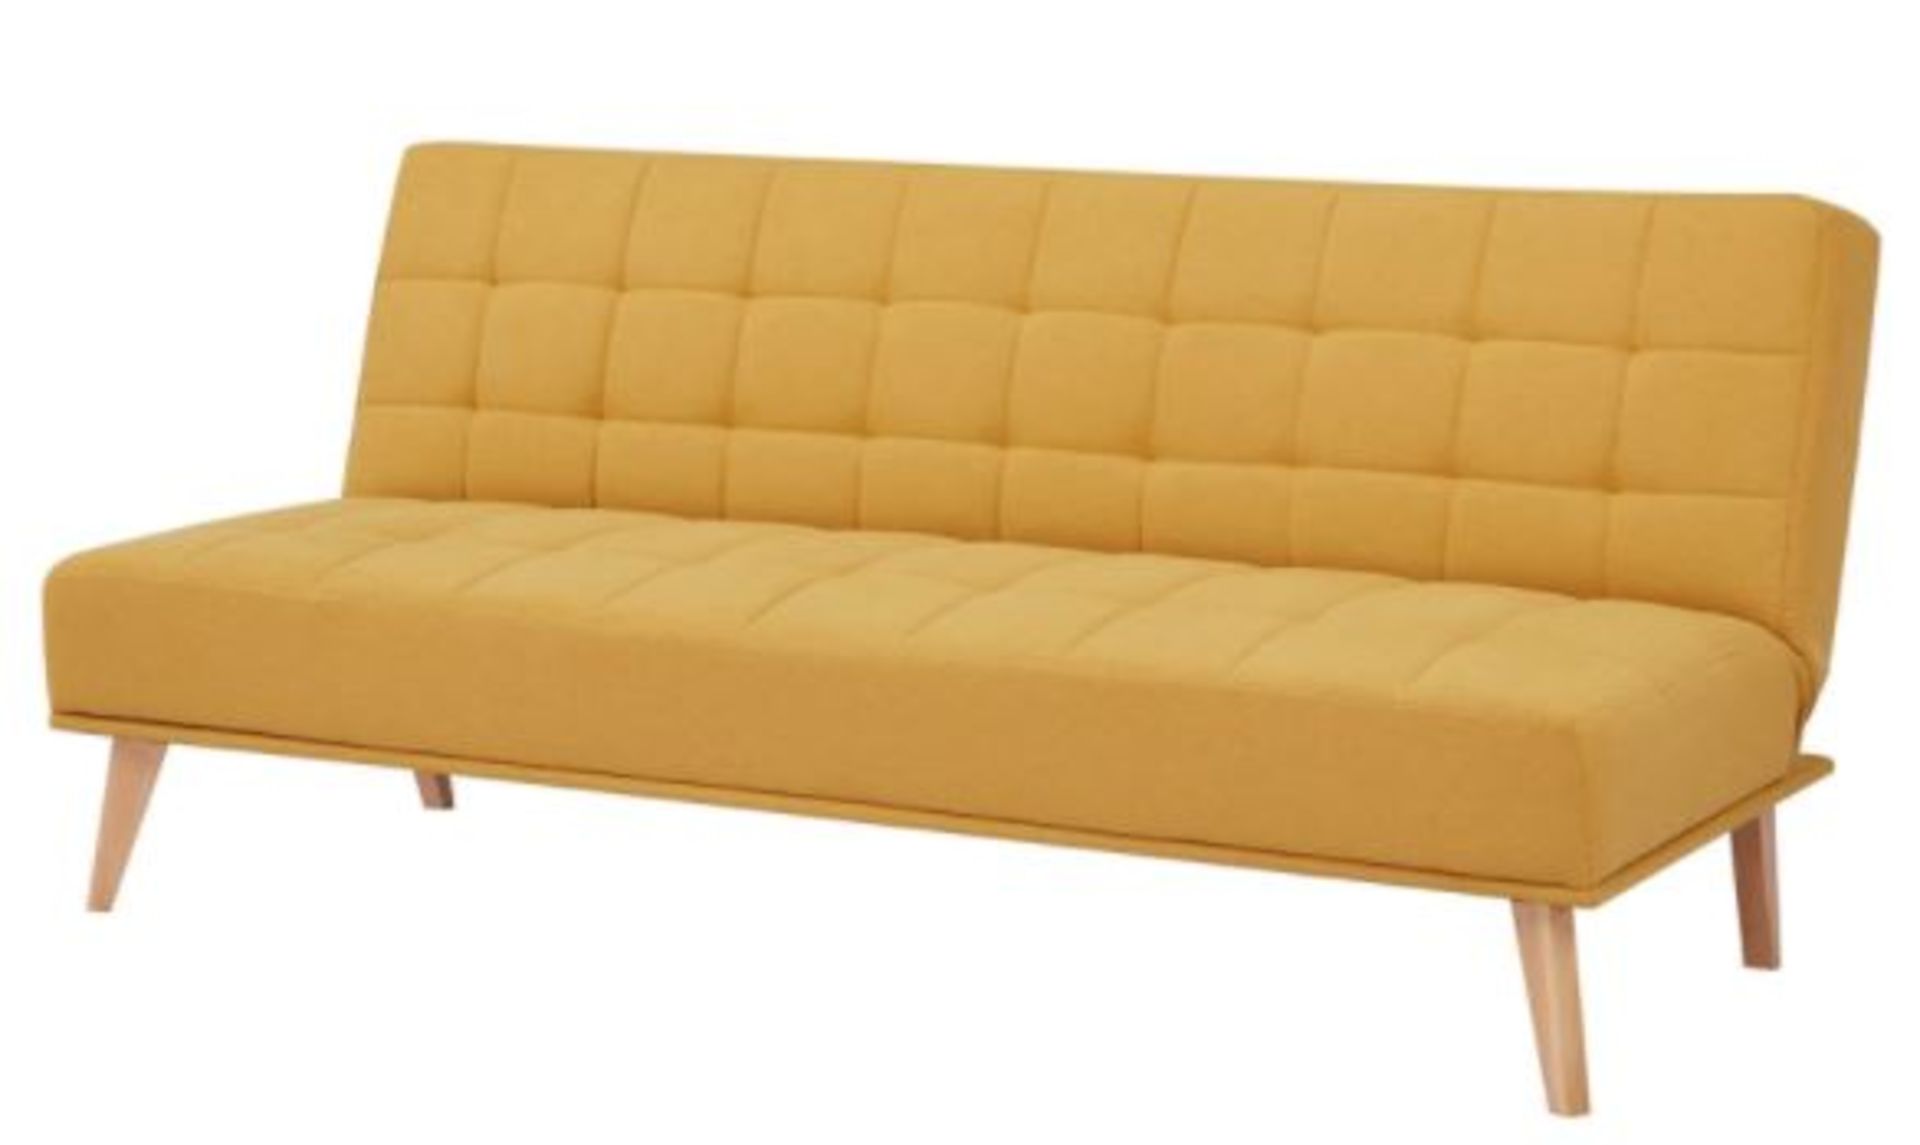 (R6H) Household. 1 X Clik Clak Kelly Sofa Bed Ochre. Wooden Frame With Solid Birchwood Legs. 100% P - Image 2 of 10